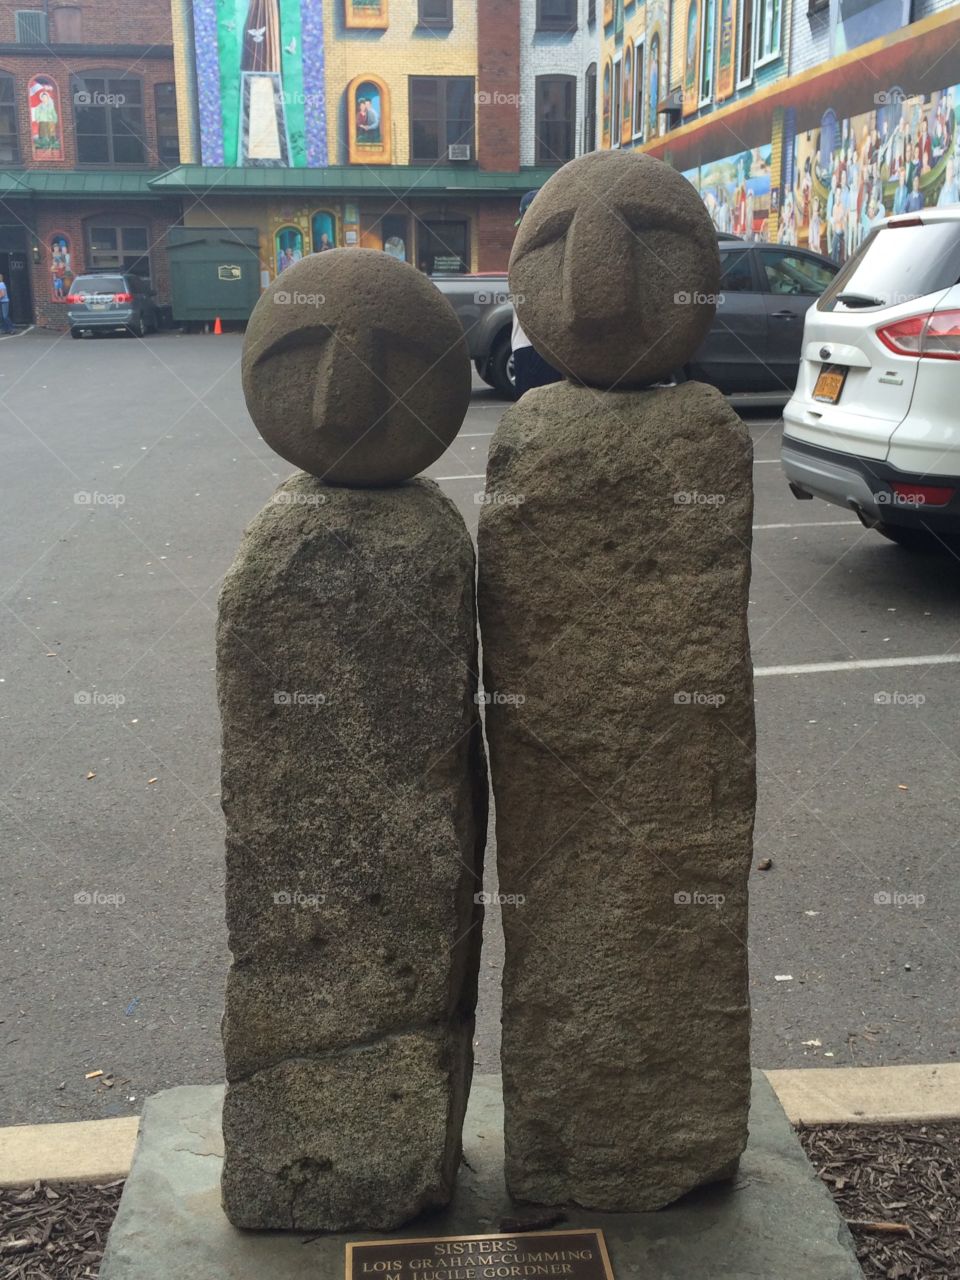 Stone sculpture of two figures in urban setting surrounded by parking lot, cars and murals